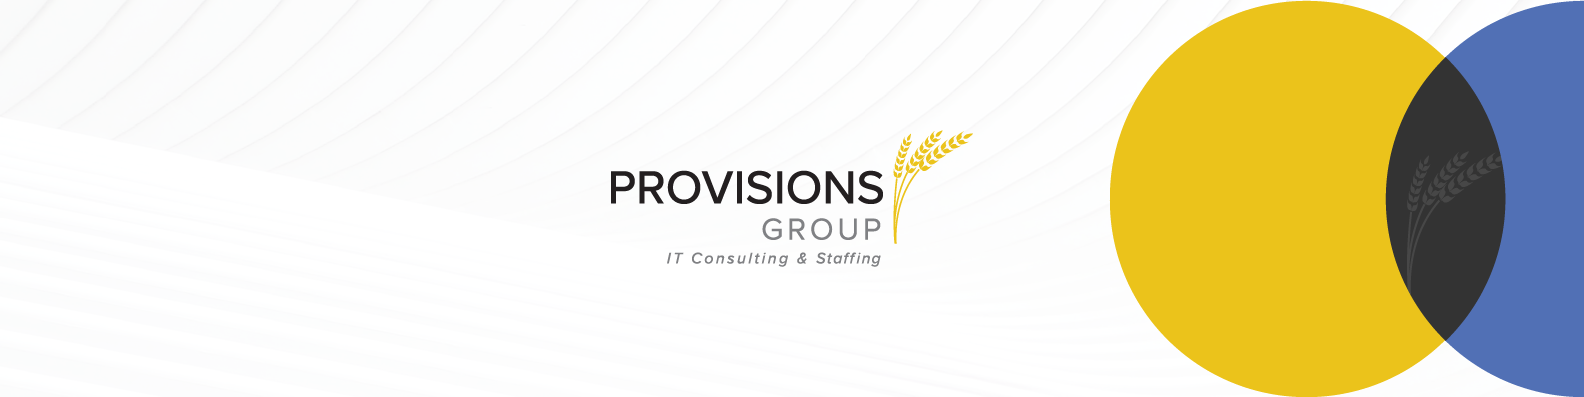 Provisions Group Banner